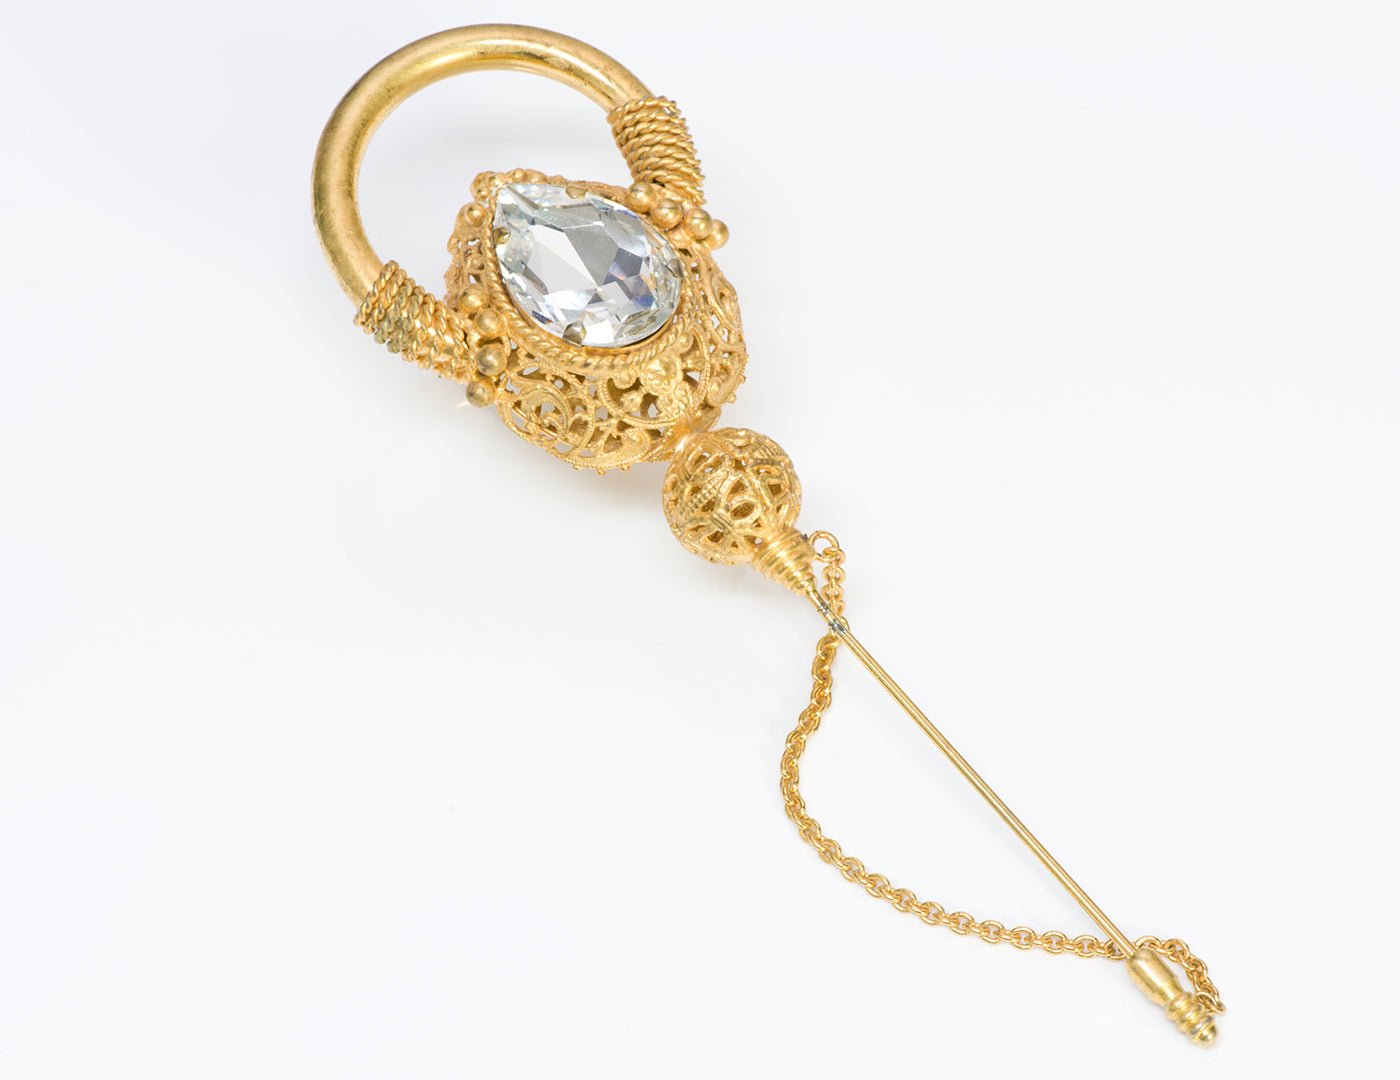 Gianfranco Ferre Gold Tone Crystal Brooch Pin